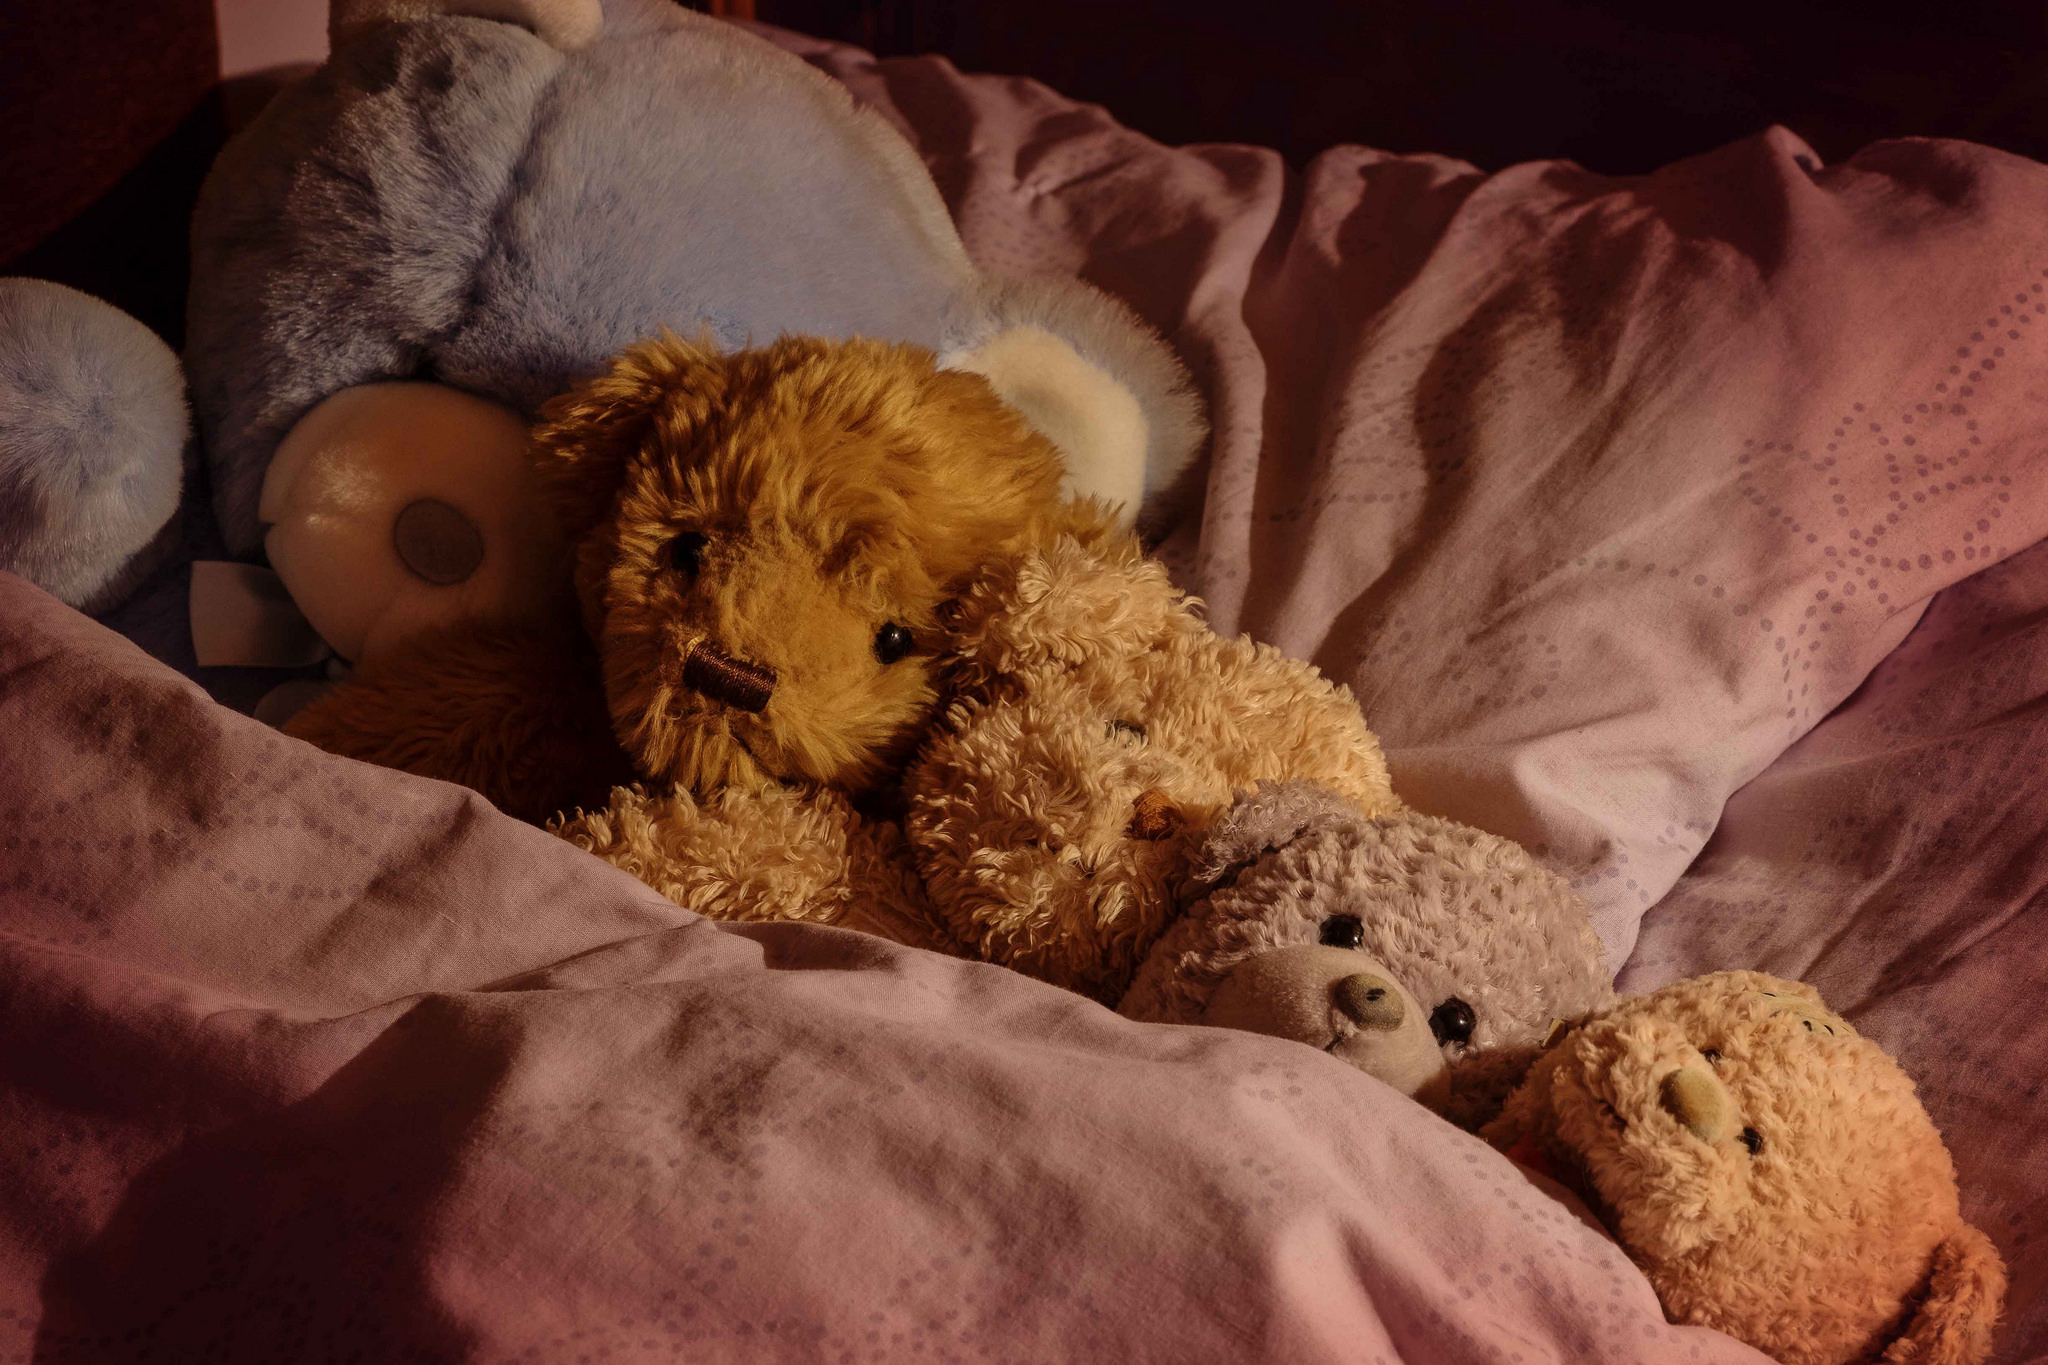 340+ Teddy Bear HD Wallpapers and Backgrounds